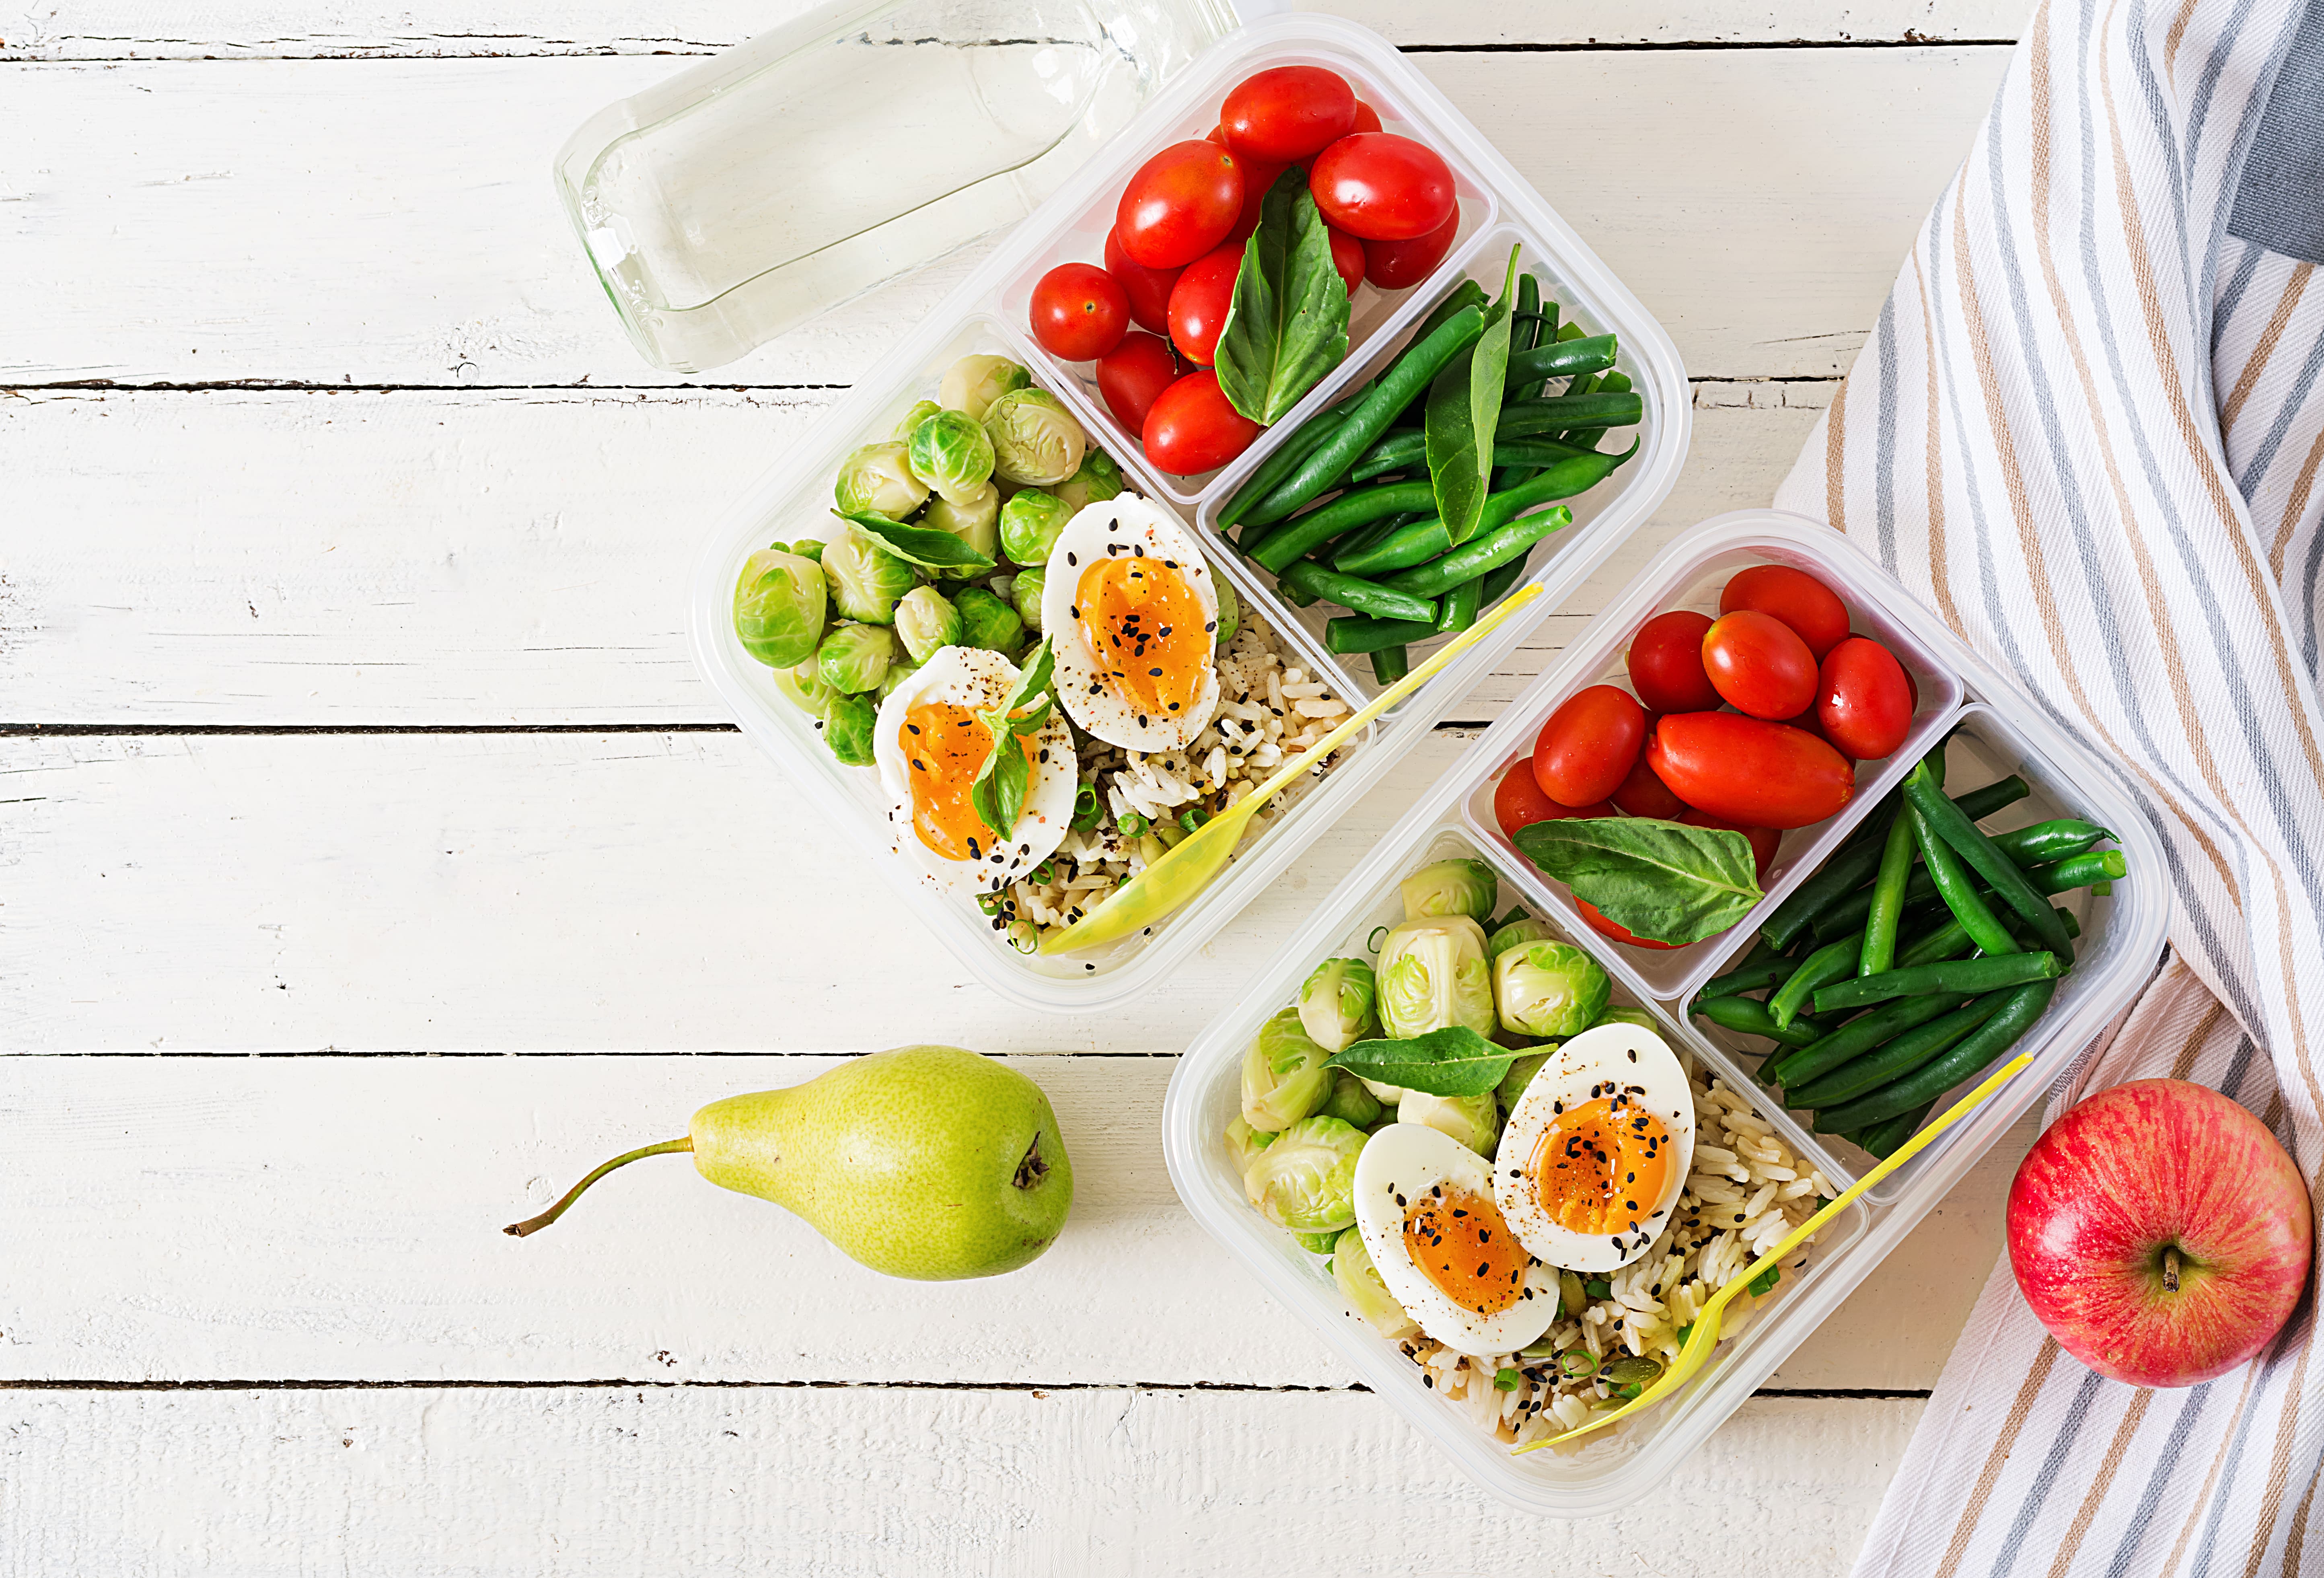 vegetarian-meal-prep-containers-with-eggs-brussel-sprouts-green-beans-tomato-dinner-lunch-box-top-view-flat-lay-min.jpg